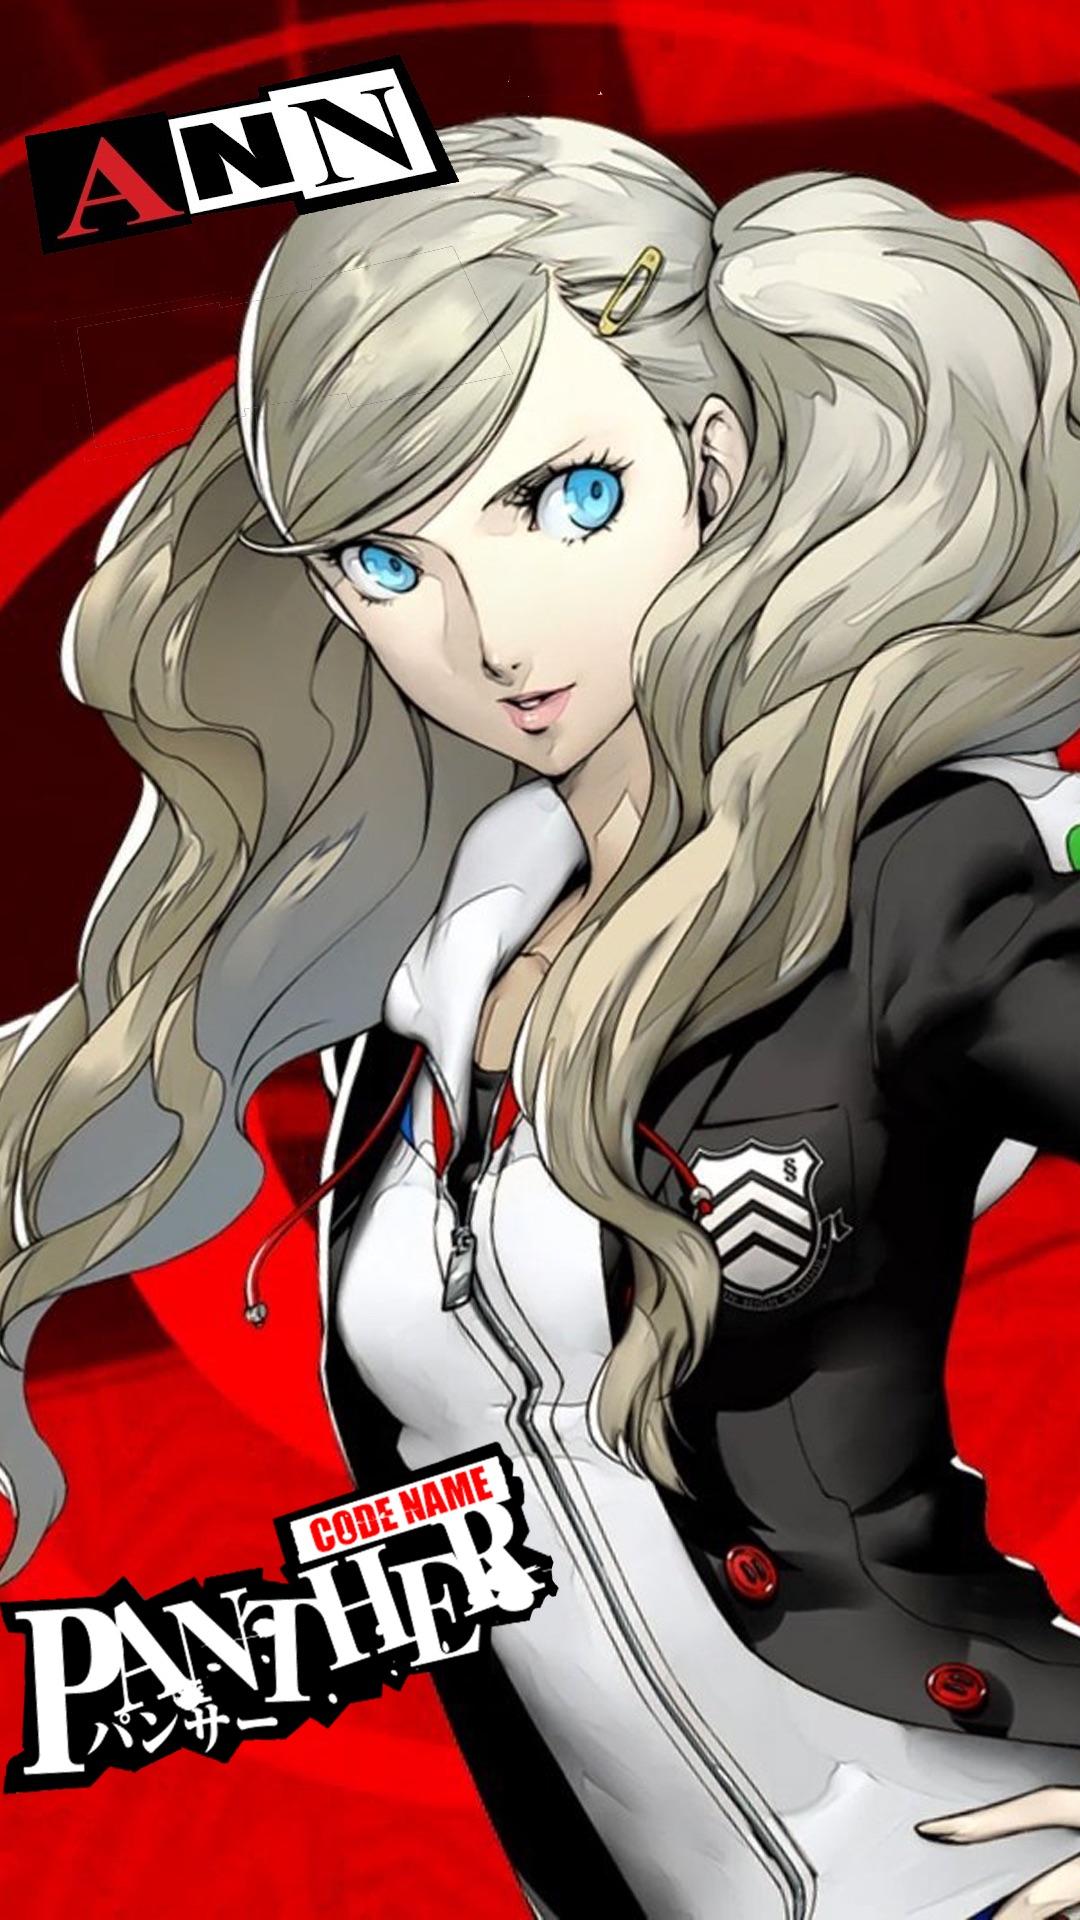 Ann Wallpaper I Made For iPhone 6s Plus R Persona5